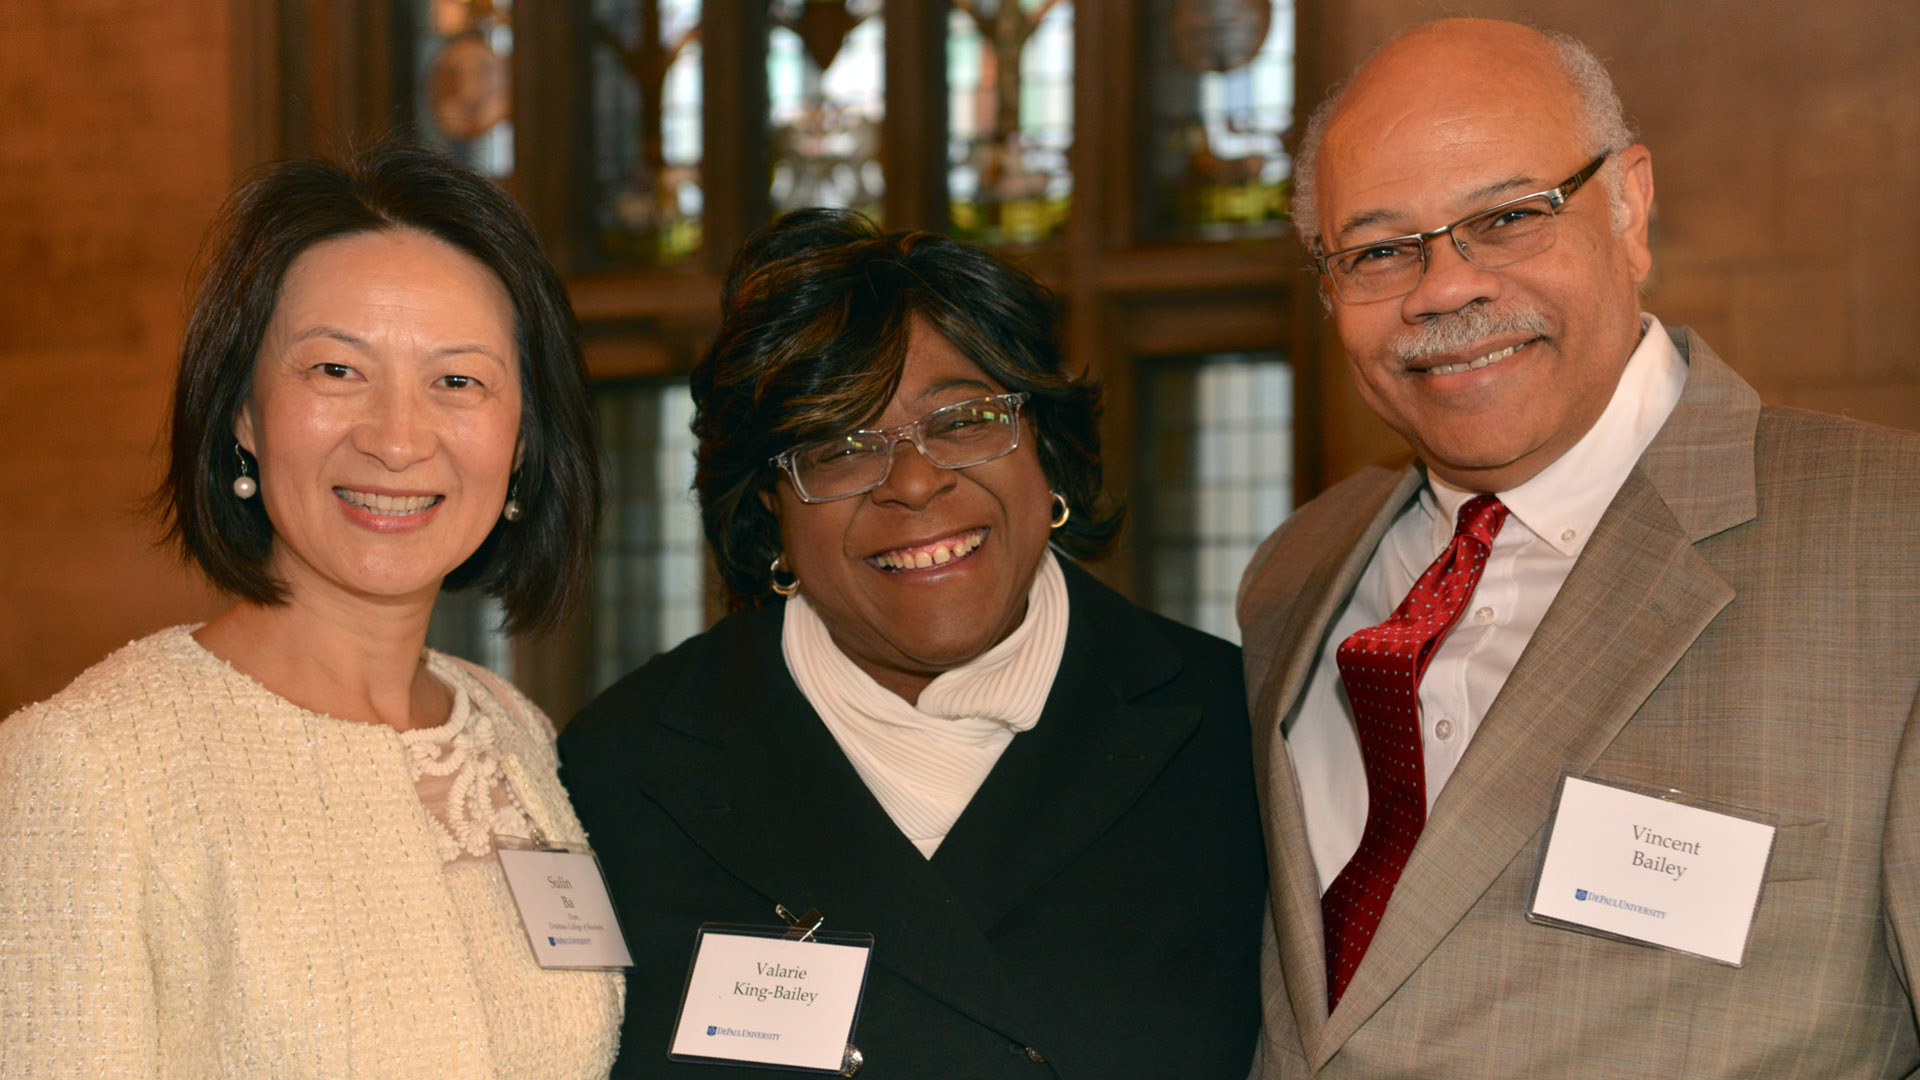 From left to right: Dean of the Driehaus College of Business Sulin Ba with CEC Advisory Board co-chair Valarie King-Bailey and Vincent Bailey.